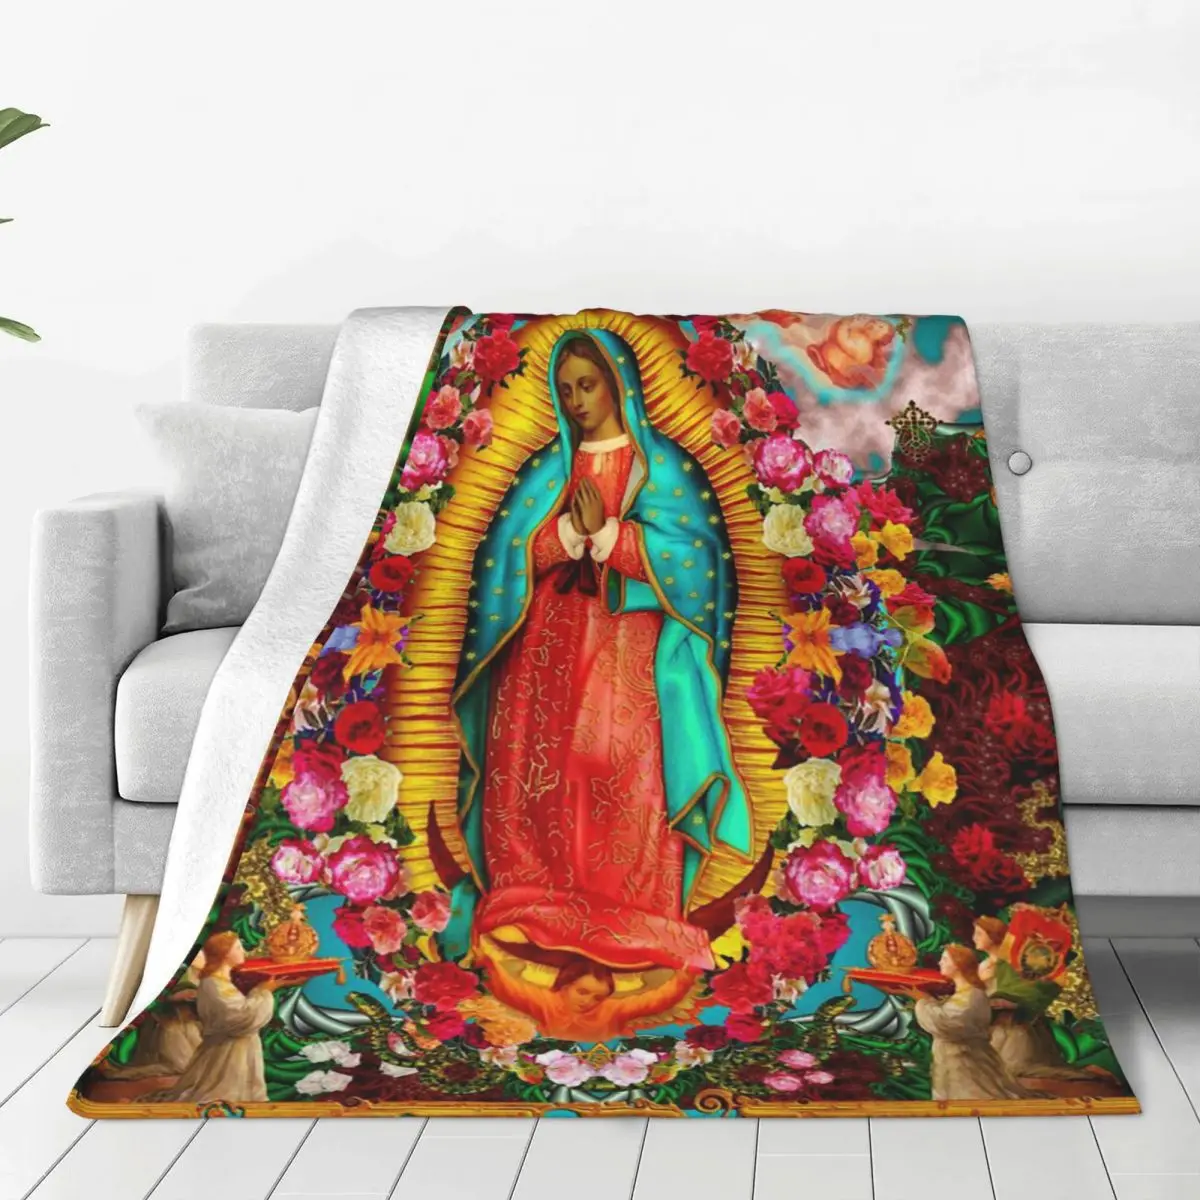 

Virgin Mary Jesus Our Lady Of Guadalupe Blanket Mexican Christian Throw Blanket Summer Air Conditioning Decor Soft Bedsprea